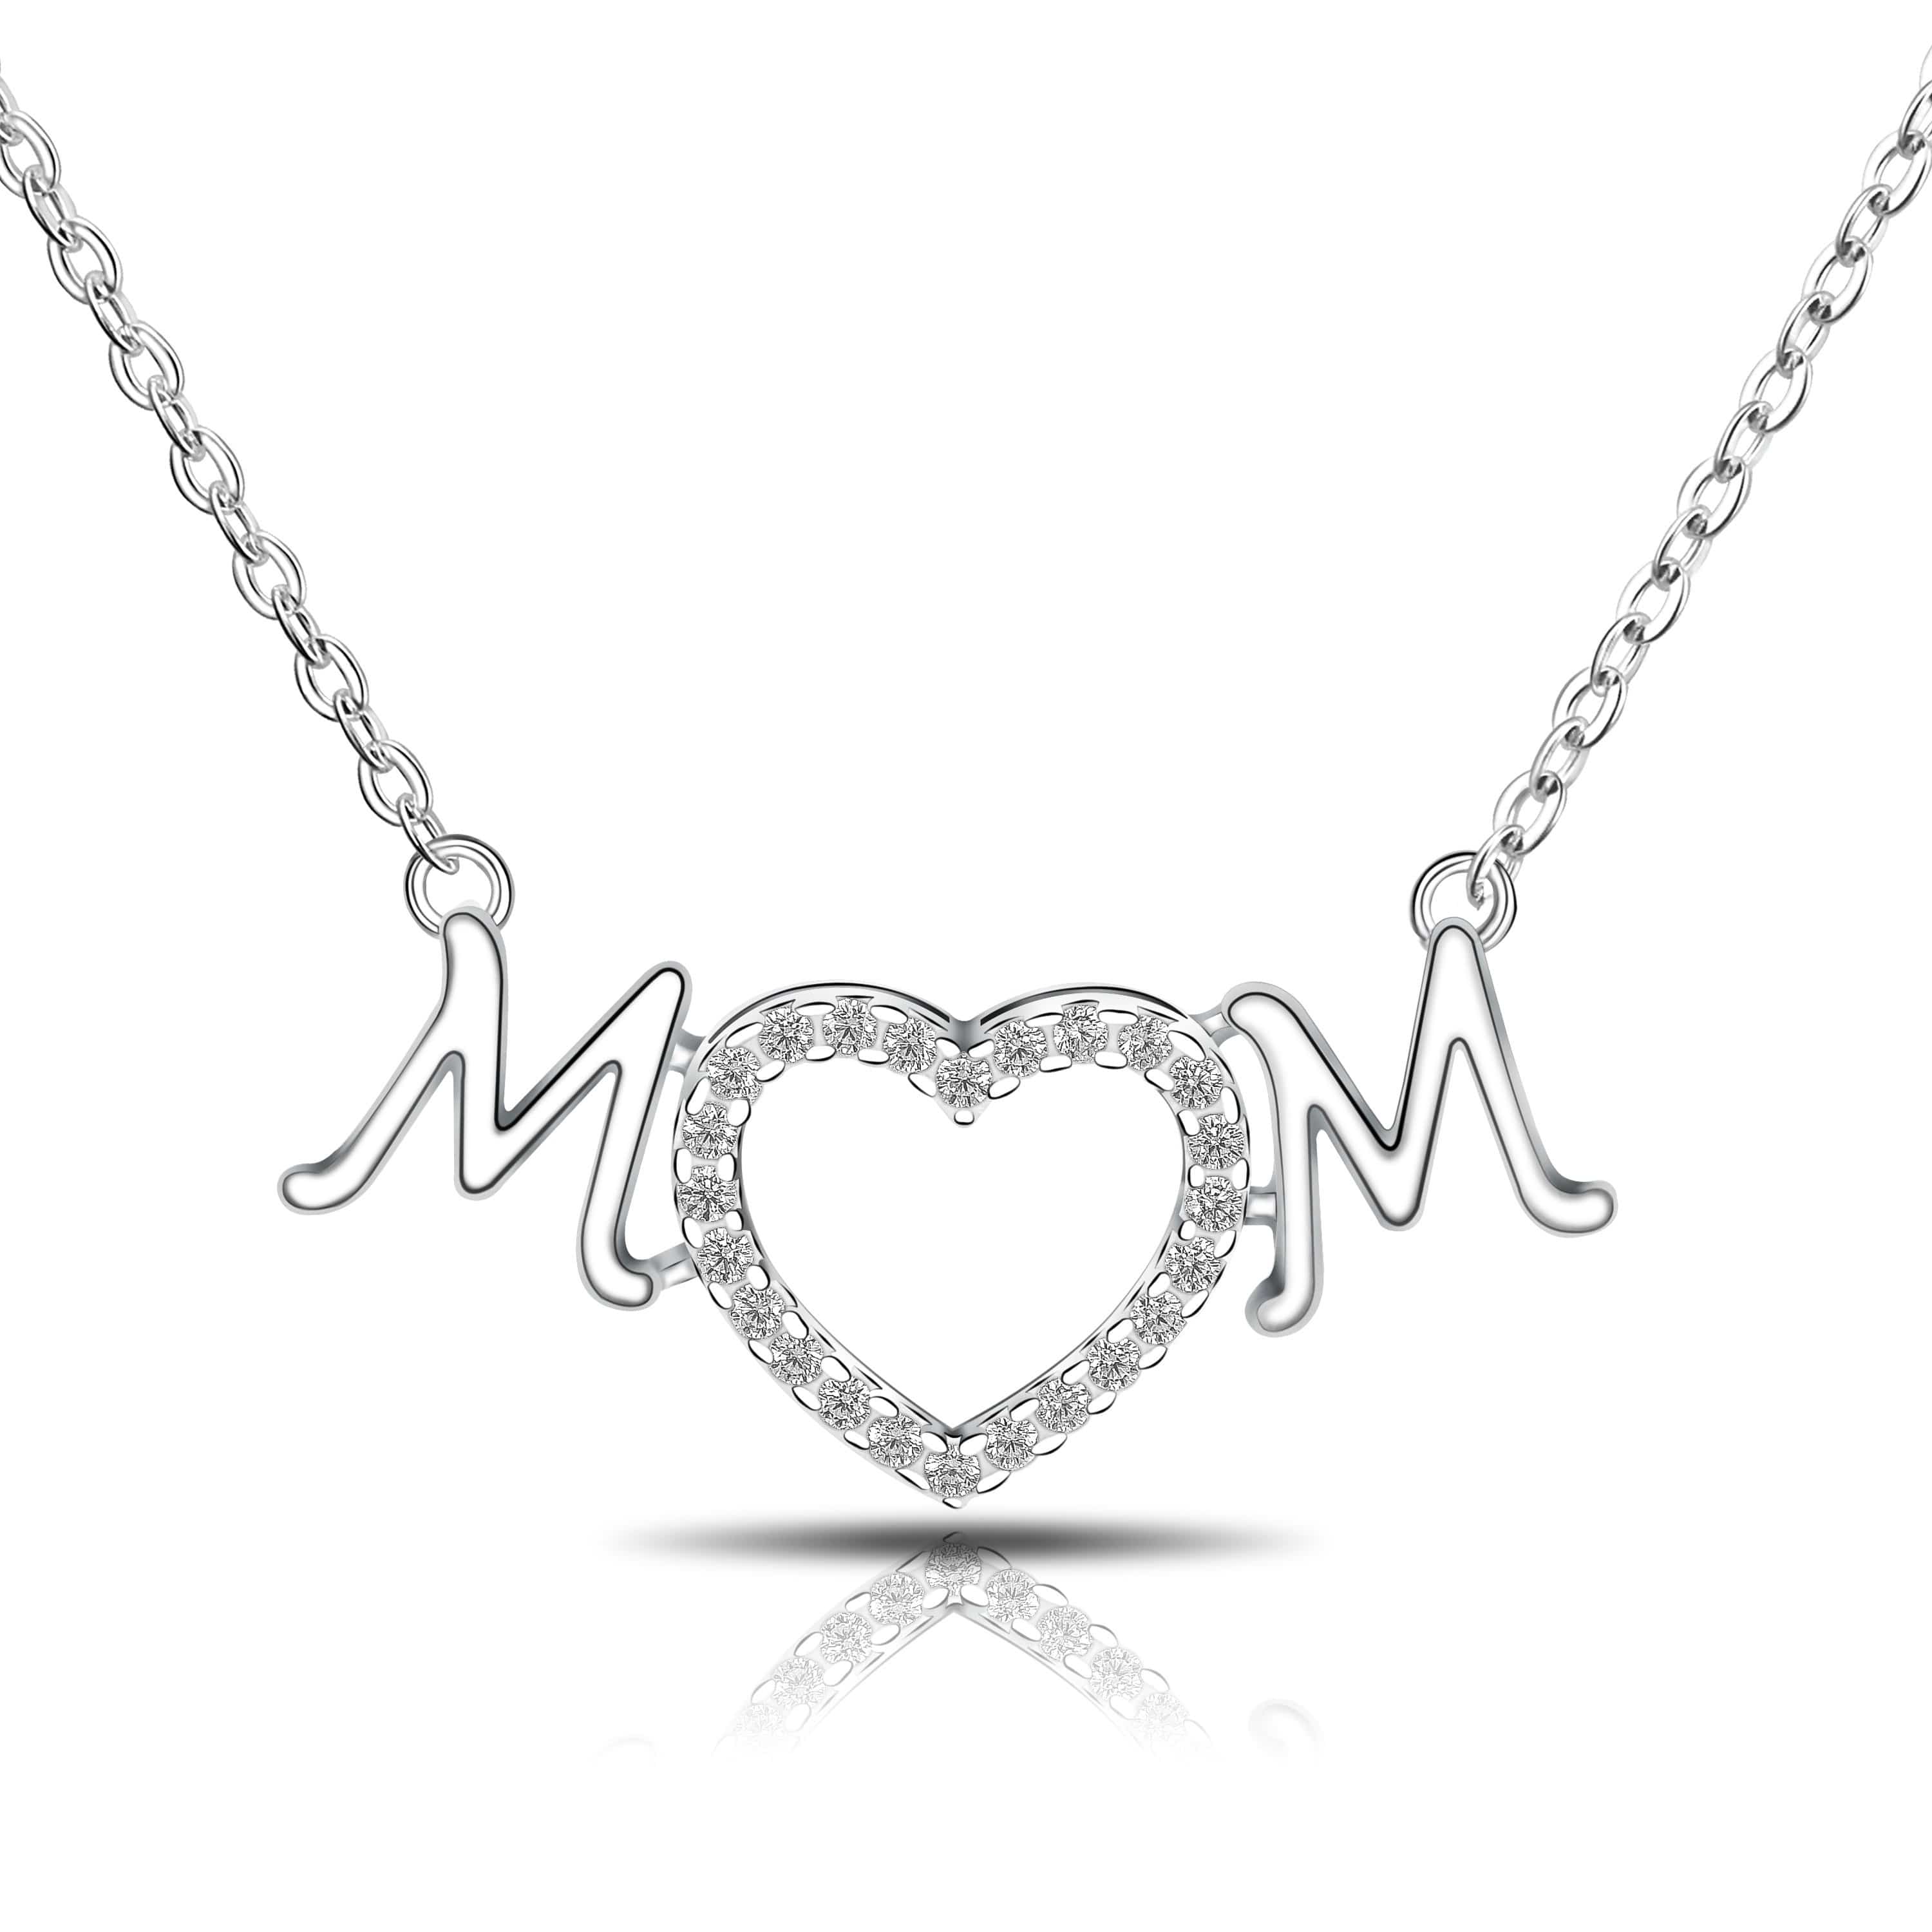 Mother Heart Necklace Sterling Silver Pendant Necklace